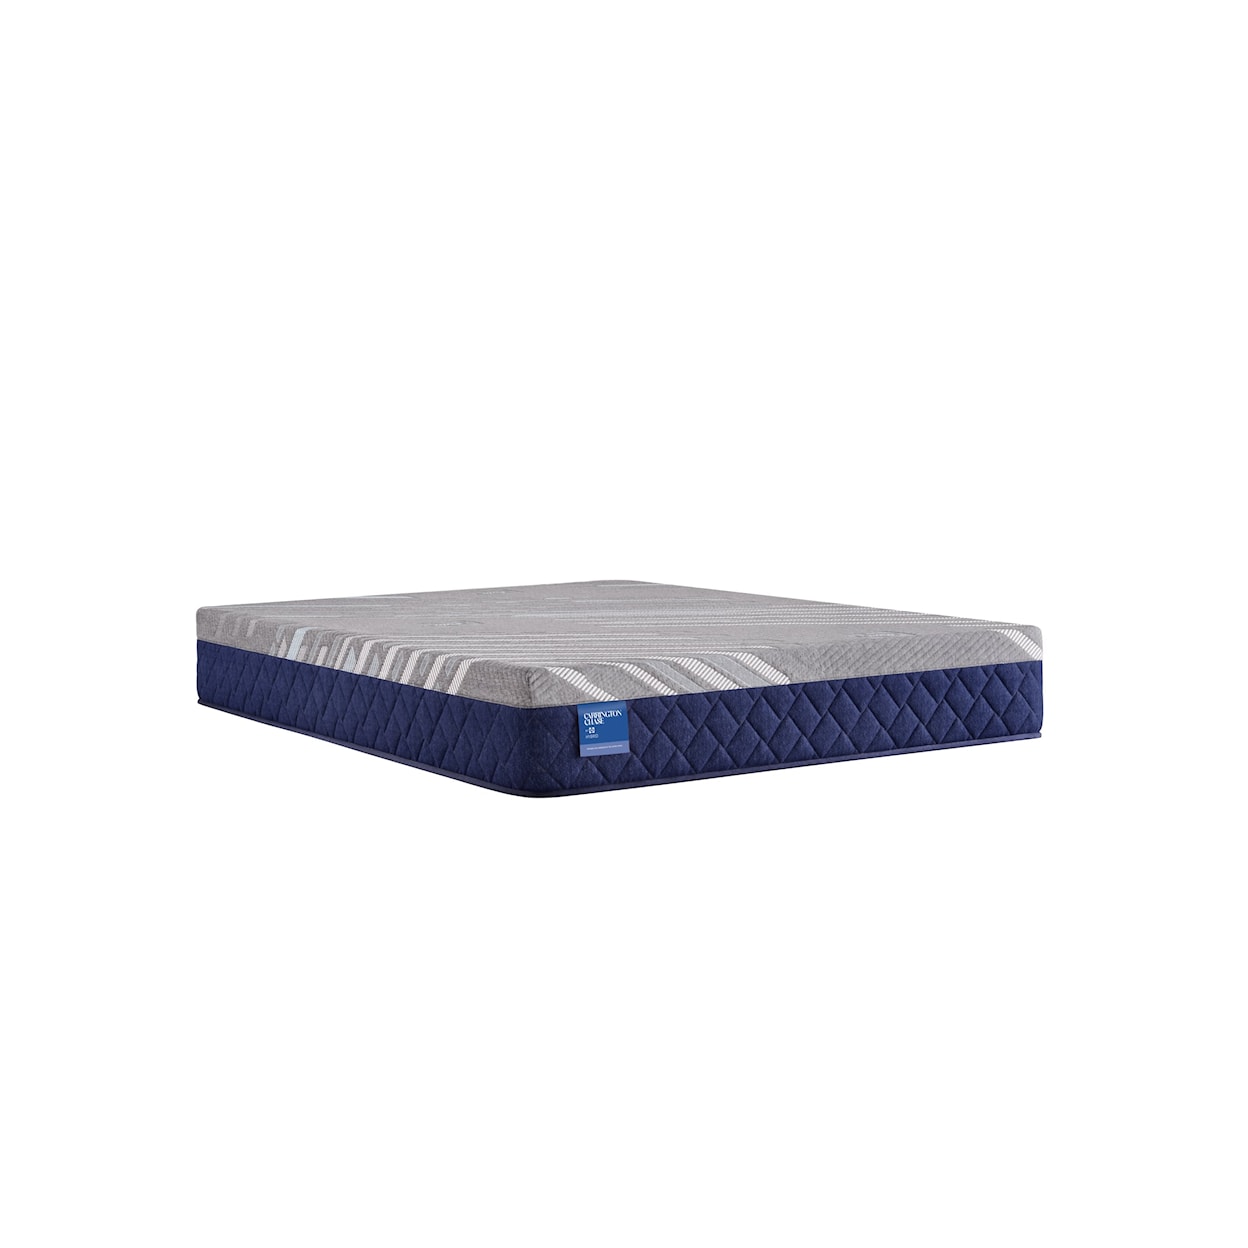 Sealy Carrington Chase H4 Firm Queen Mattress